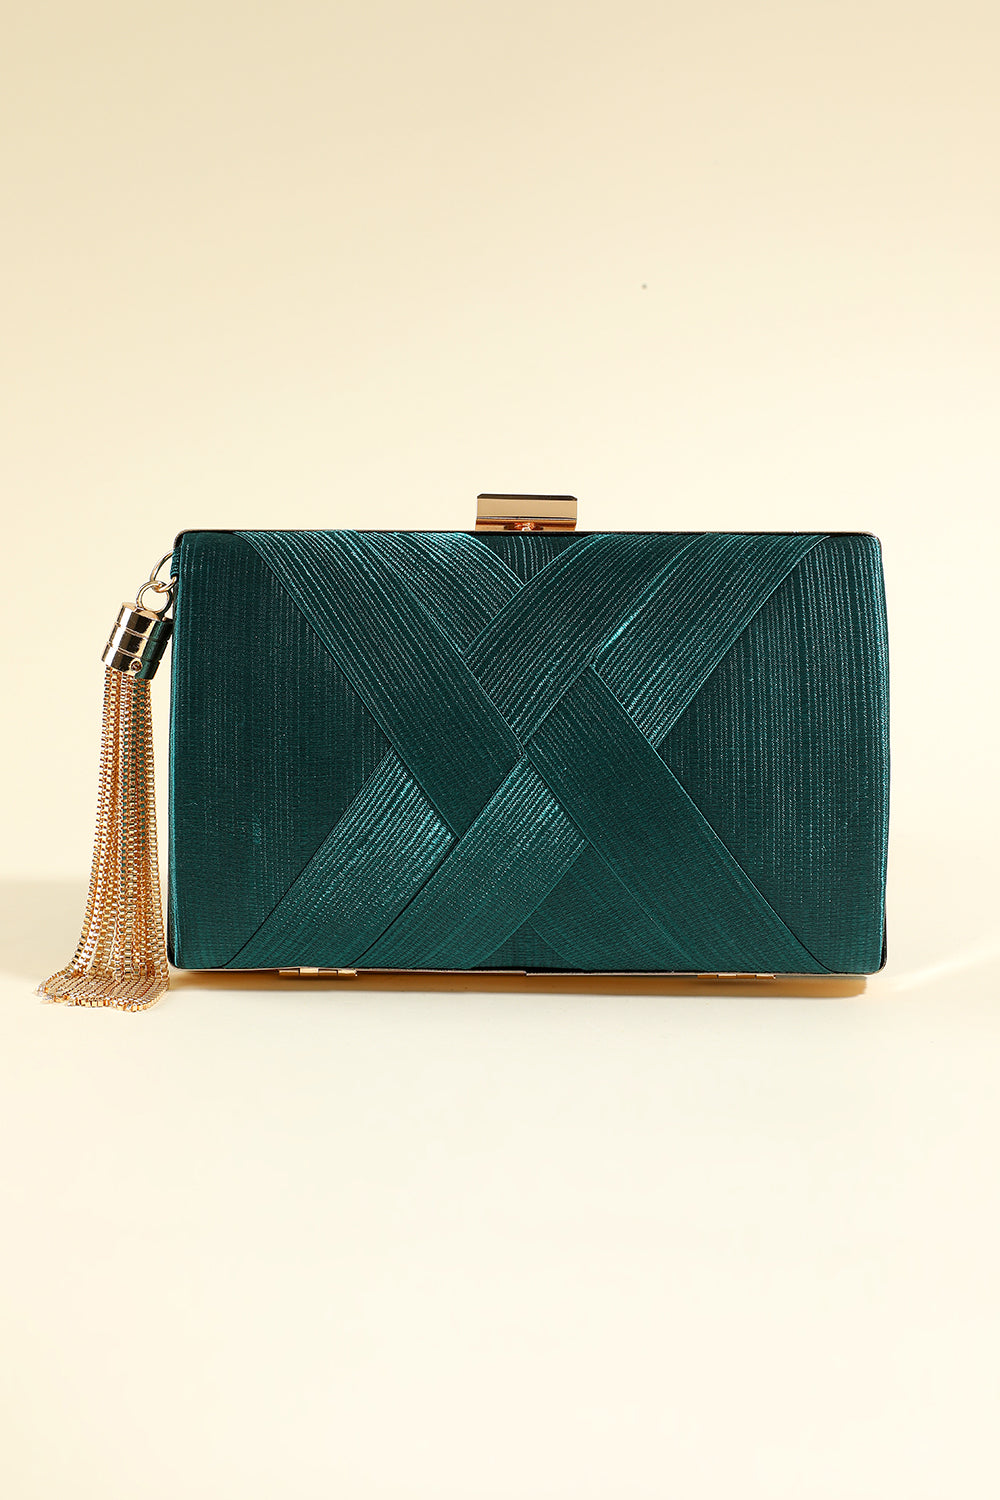 Green Delicate/Shining/Unique Party Clutch Bags